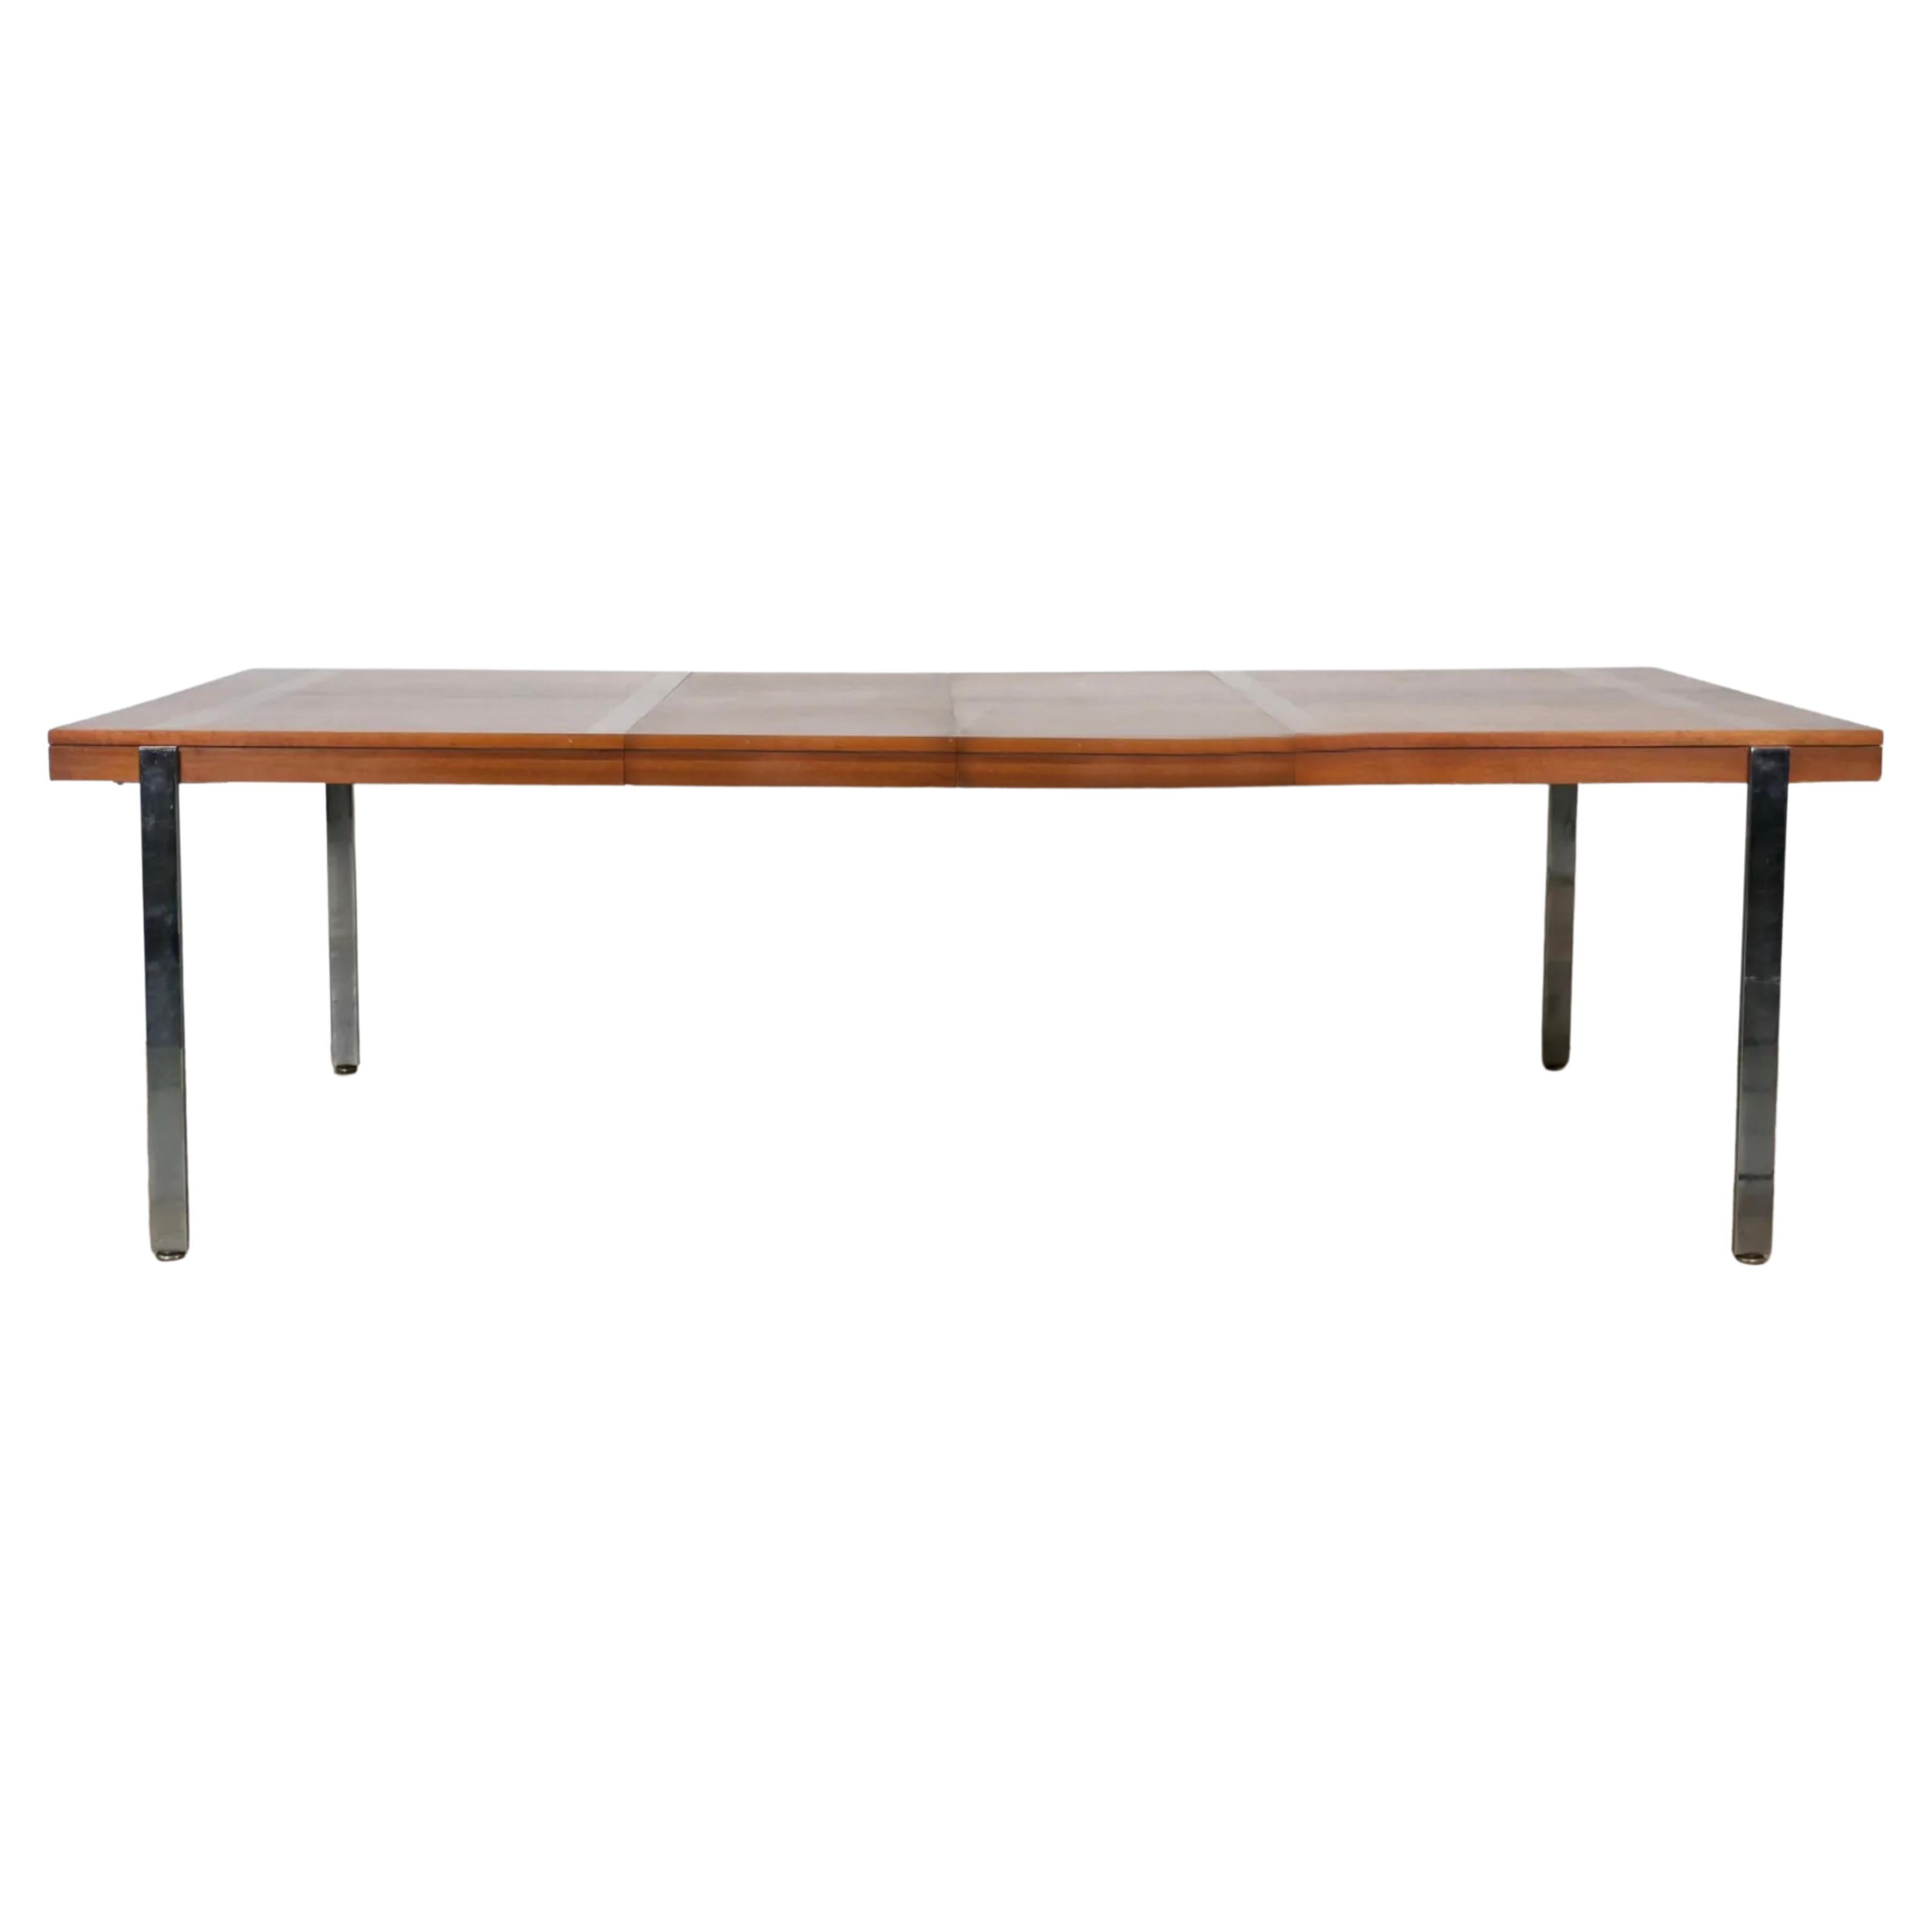 Mid Century Modern Lane Walnut Rosewood Dining table with Chrome legs 2 leaves